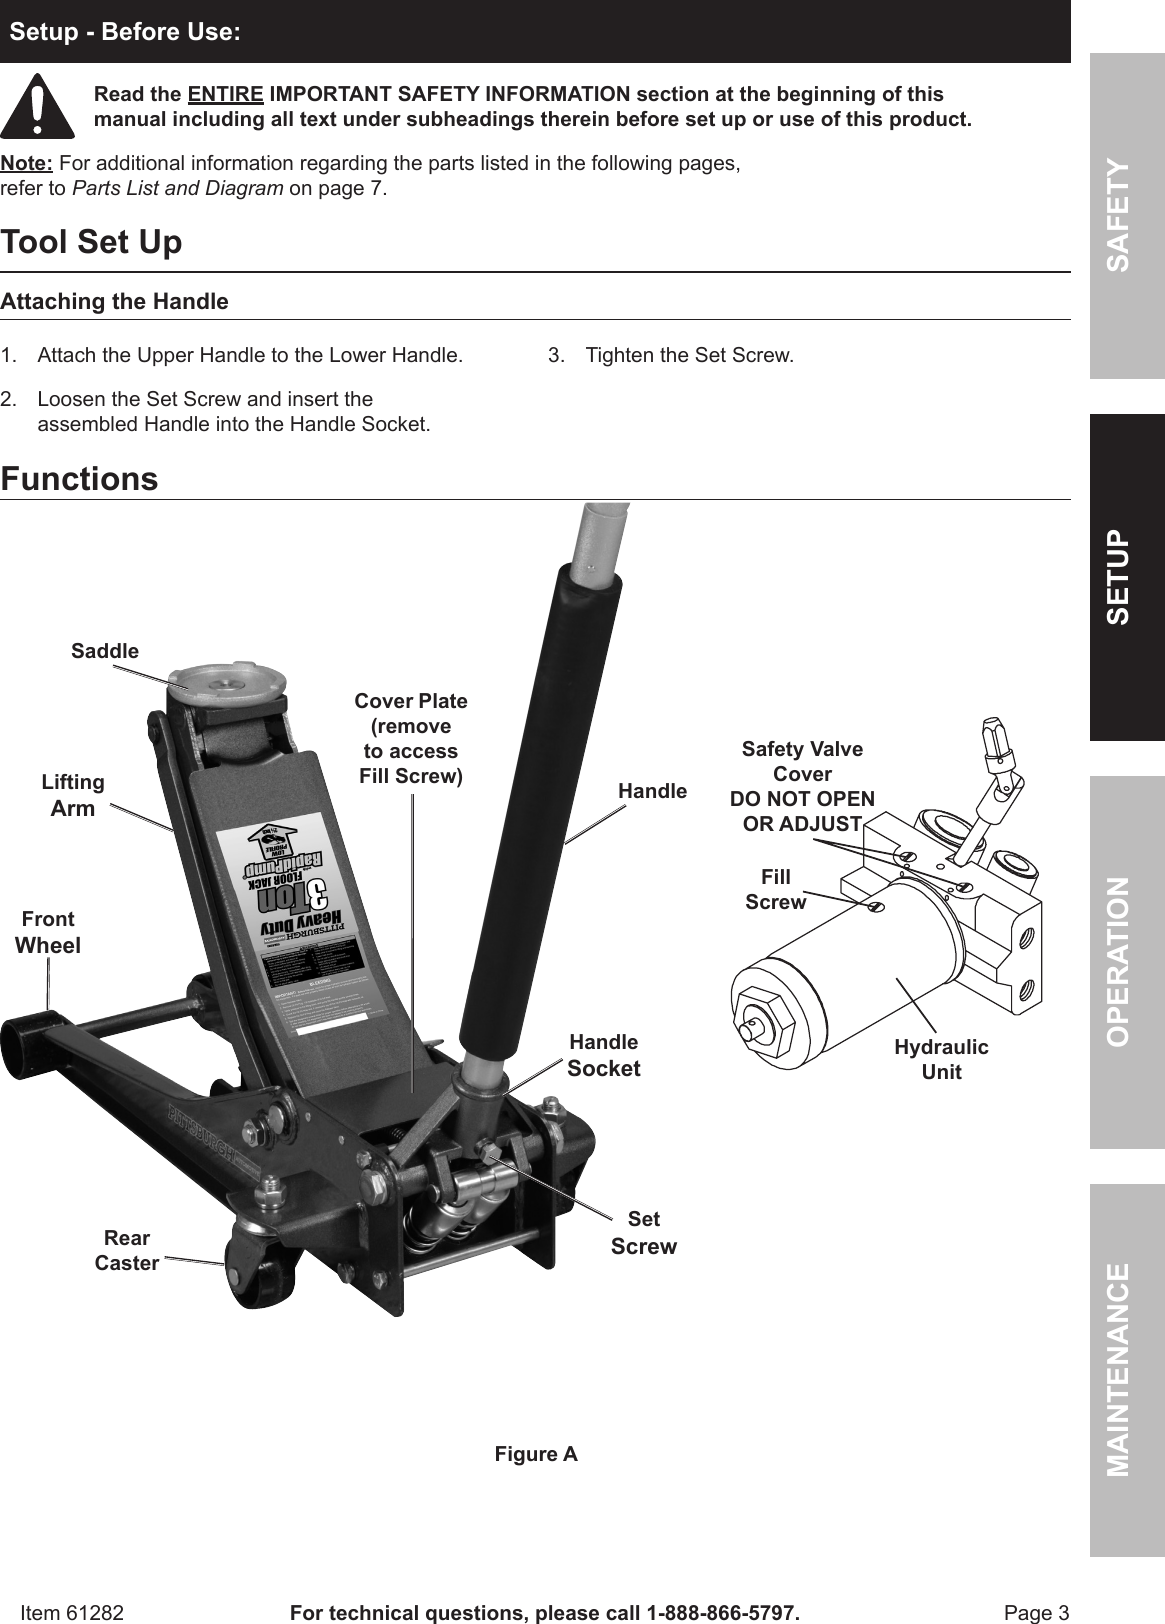 Page 3 of 8 - Harbor-Freight Harbor-Freight-3-Ton-Low-Profile-Steel-Heavy-Duty-Floor-Jack-With-Rapid-Pump-Product-Manual-  Harbor-freight-3-ton-low-profile-steel-heavy-duty-floor-jack-with-rapid-pump-product-manual